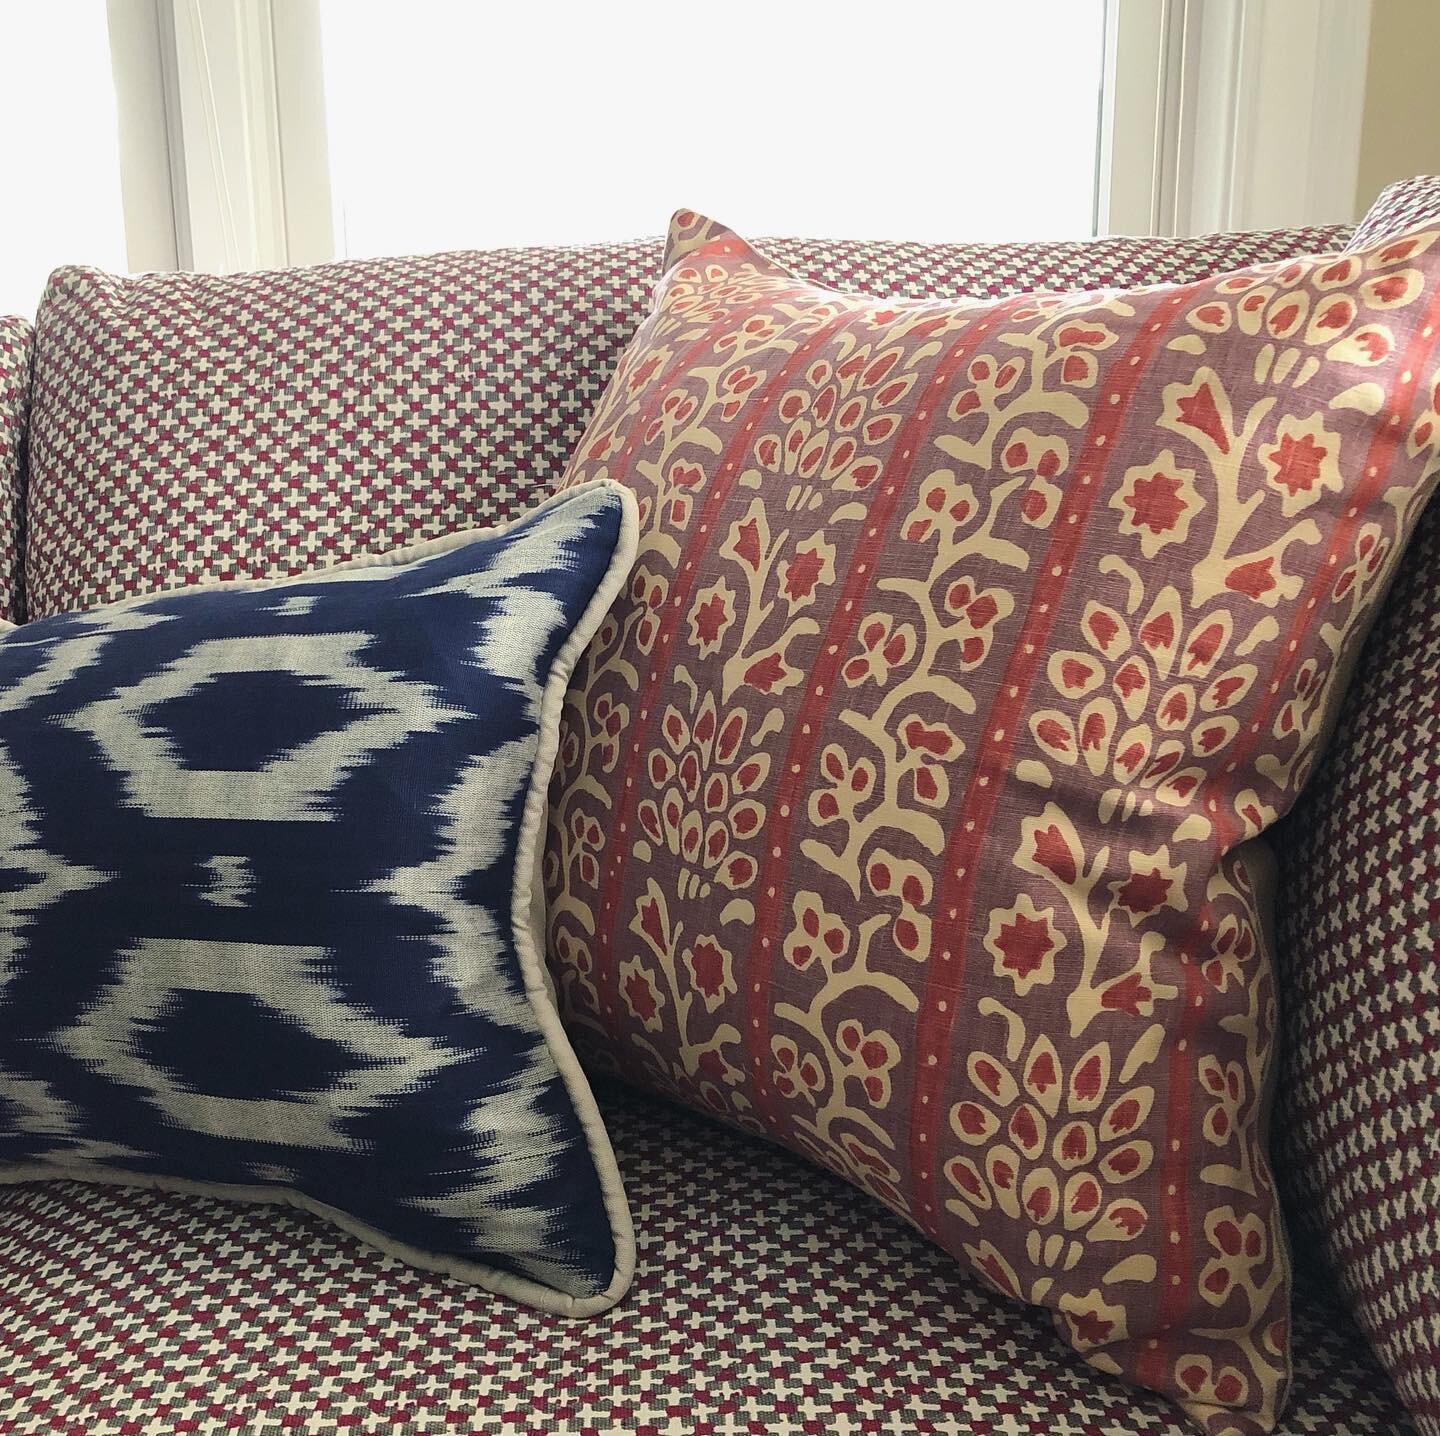 Fabrics within the Harpswell tv room that we installed earlier this week. Check out our IG story for a few pics of the installation process!
.
.
.
.
#huffardhouse #maineinteriors #custommade #customfurniture #interiordesign #mainehomes #tvroomdesign